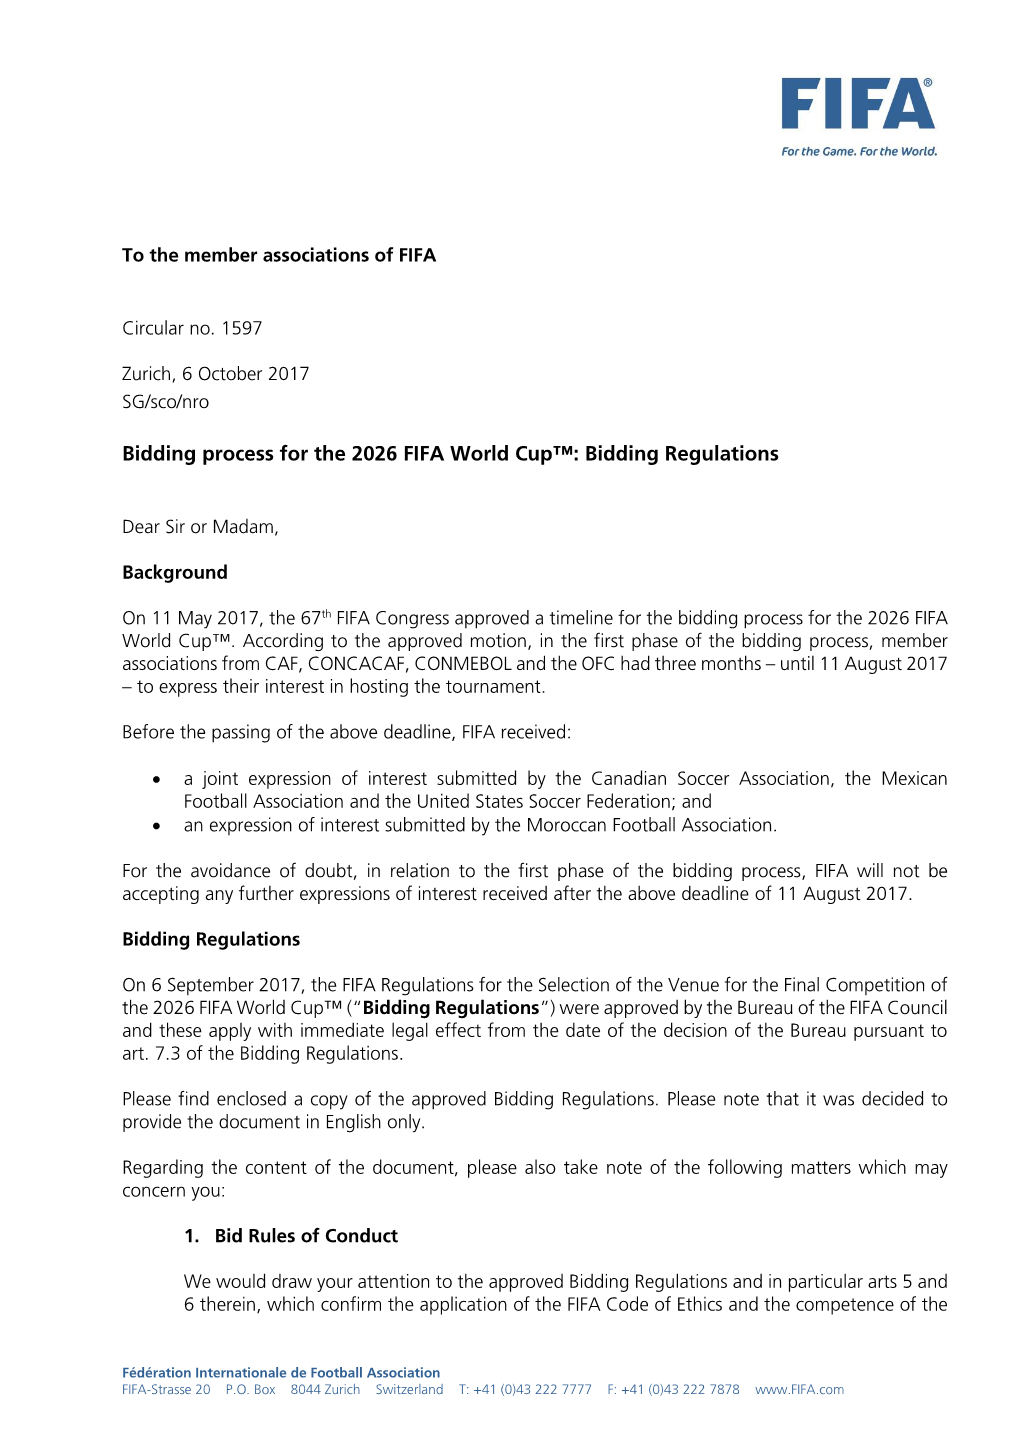 Bidding Process for the 2026 FIFA World Cup™: Bidding Regulations